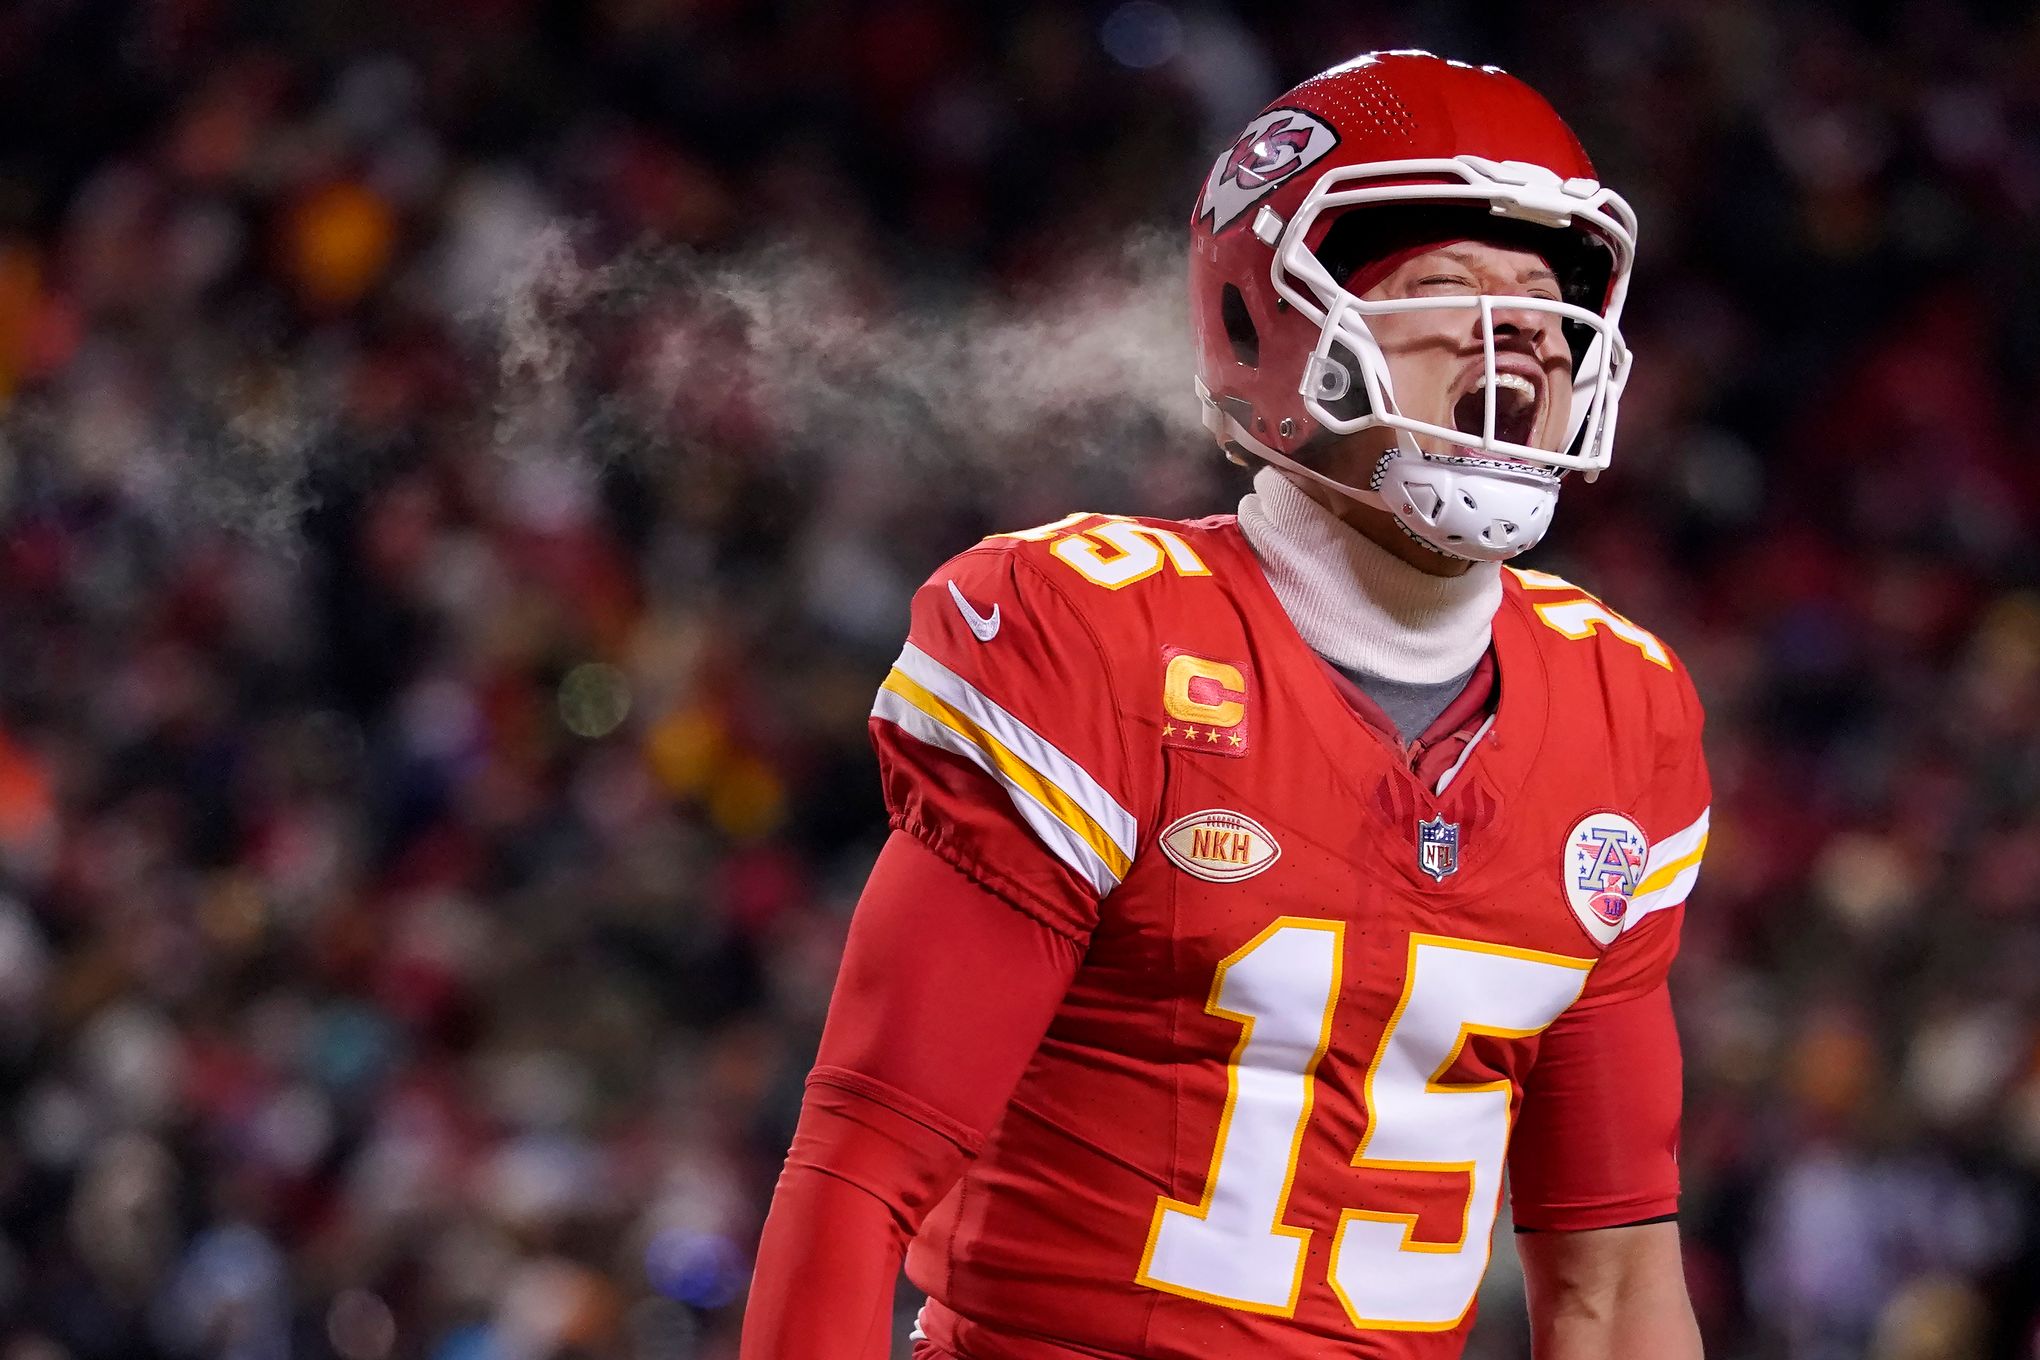 Patrick Mahomes leads Chiefs to 26-7 playoff win over Miami in near-record low temps | The Seattle Times